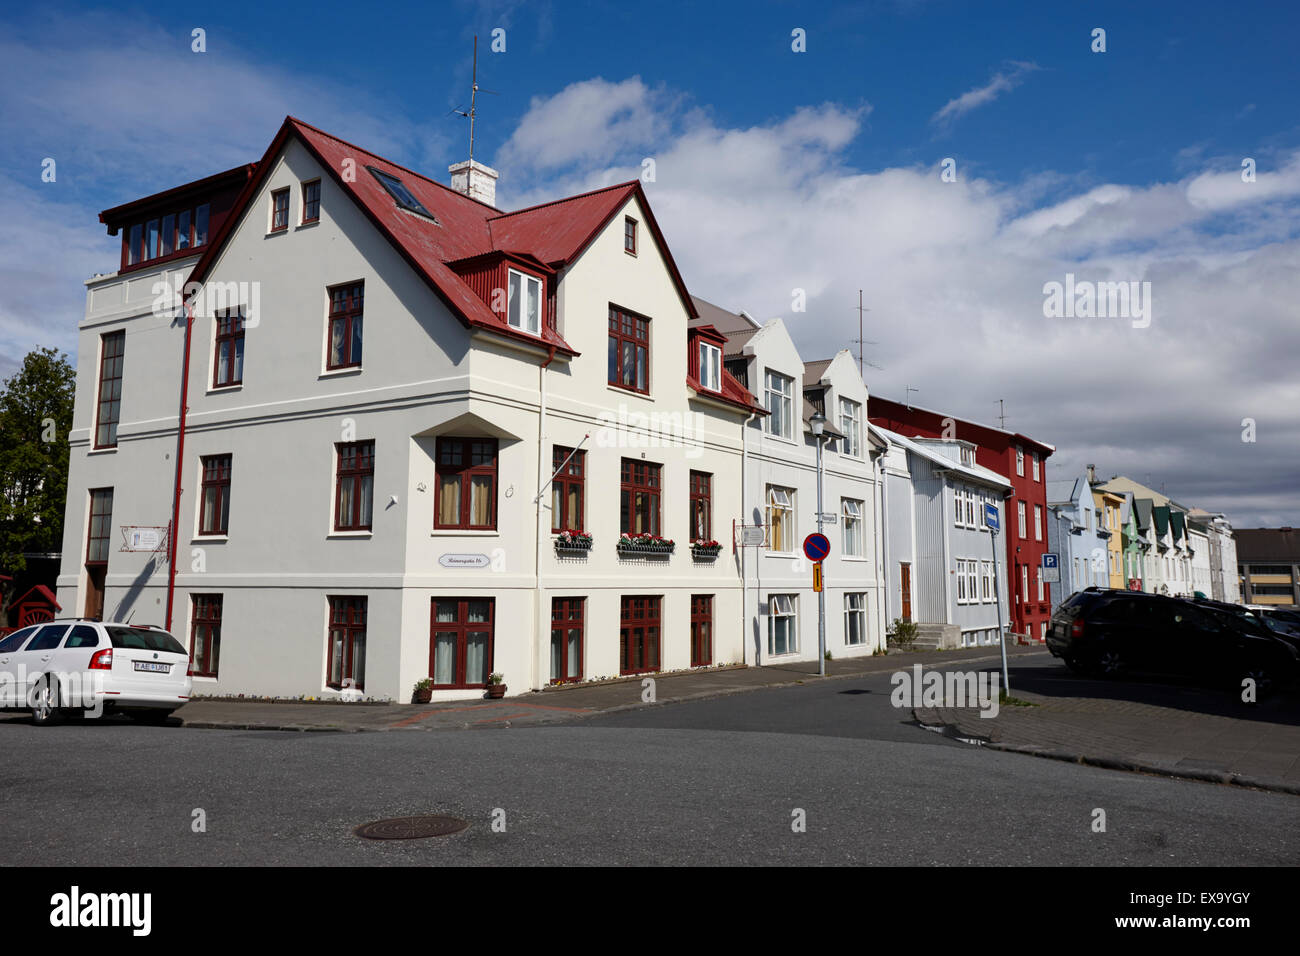 apartment buildings and traditional houses in ranargata reykjavik iceland Stock Photo